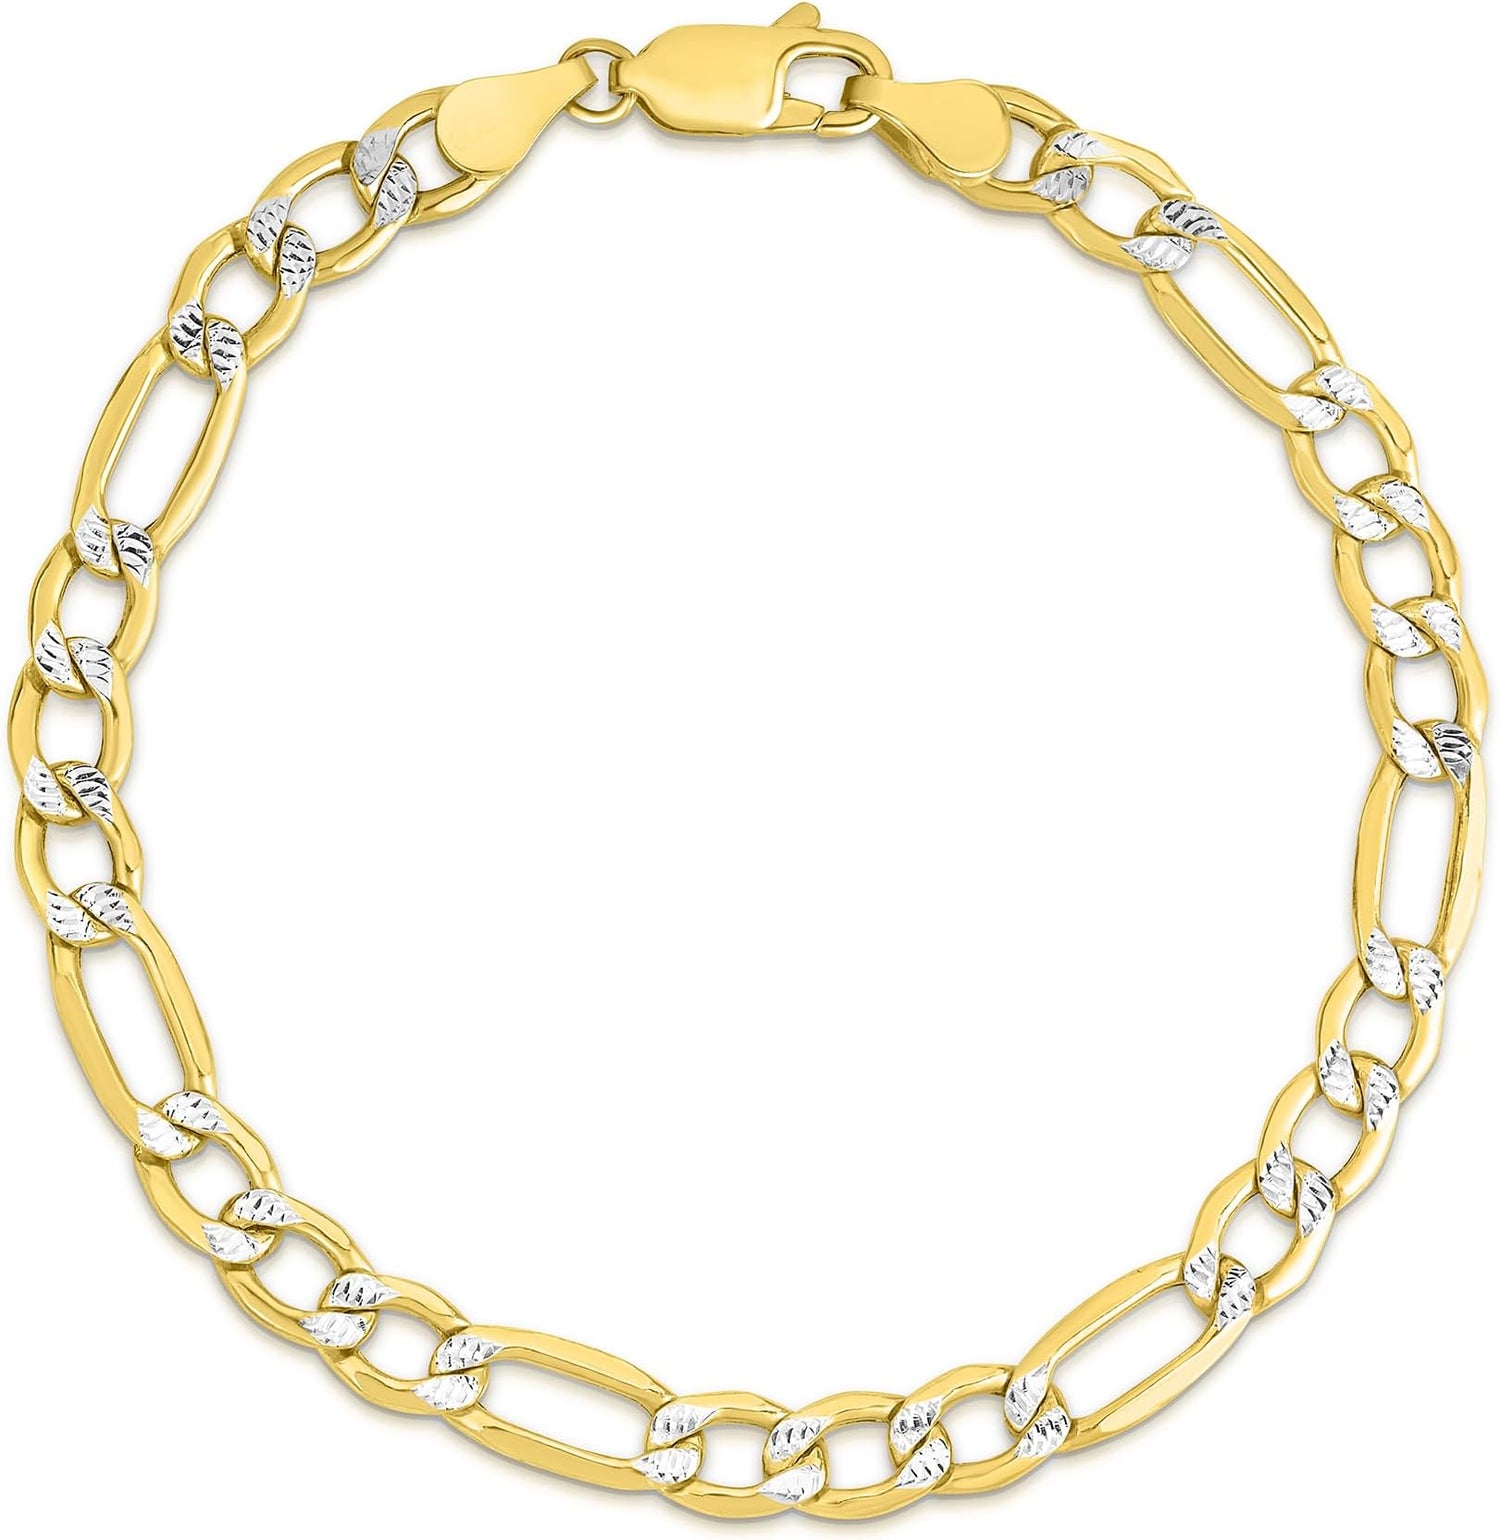 10k Two-Tone Gold 8mm Lite Pave Diamond Cut Figaro Chain Link Bracelet or Anklet